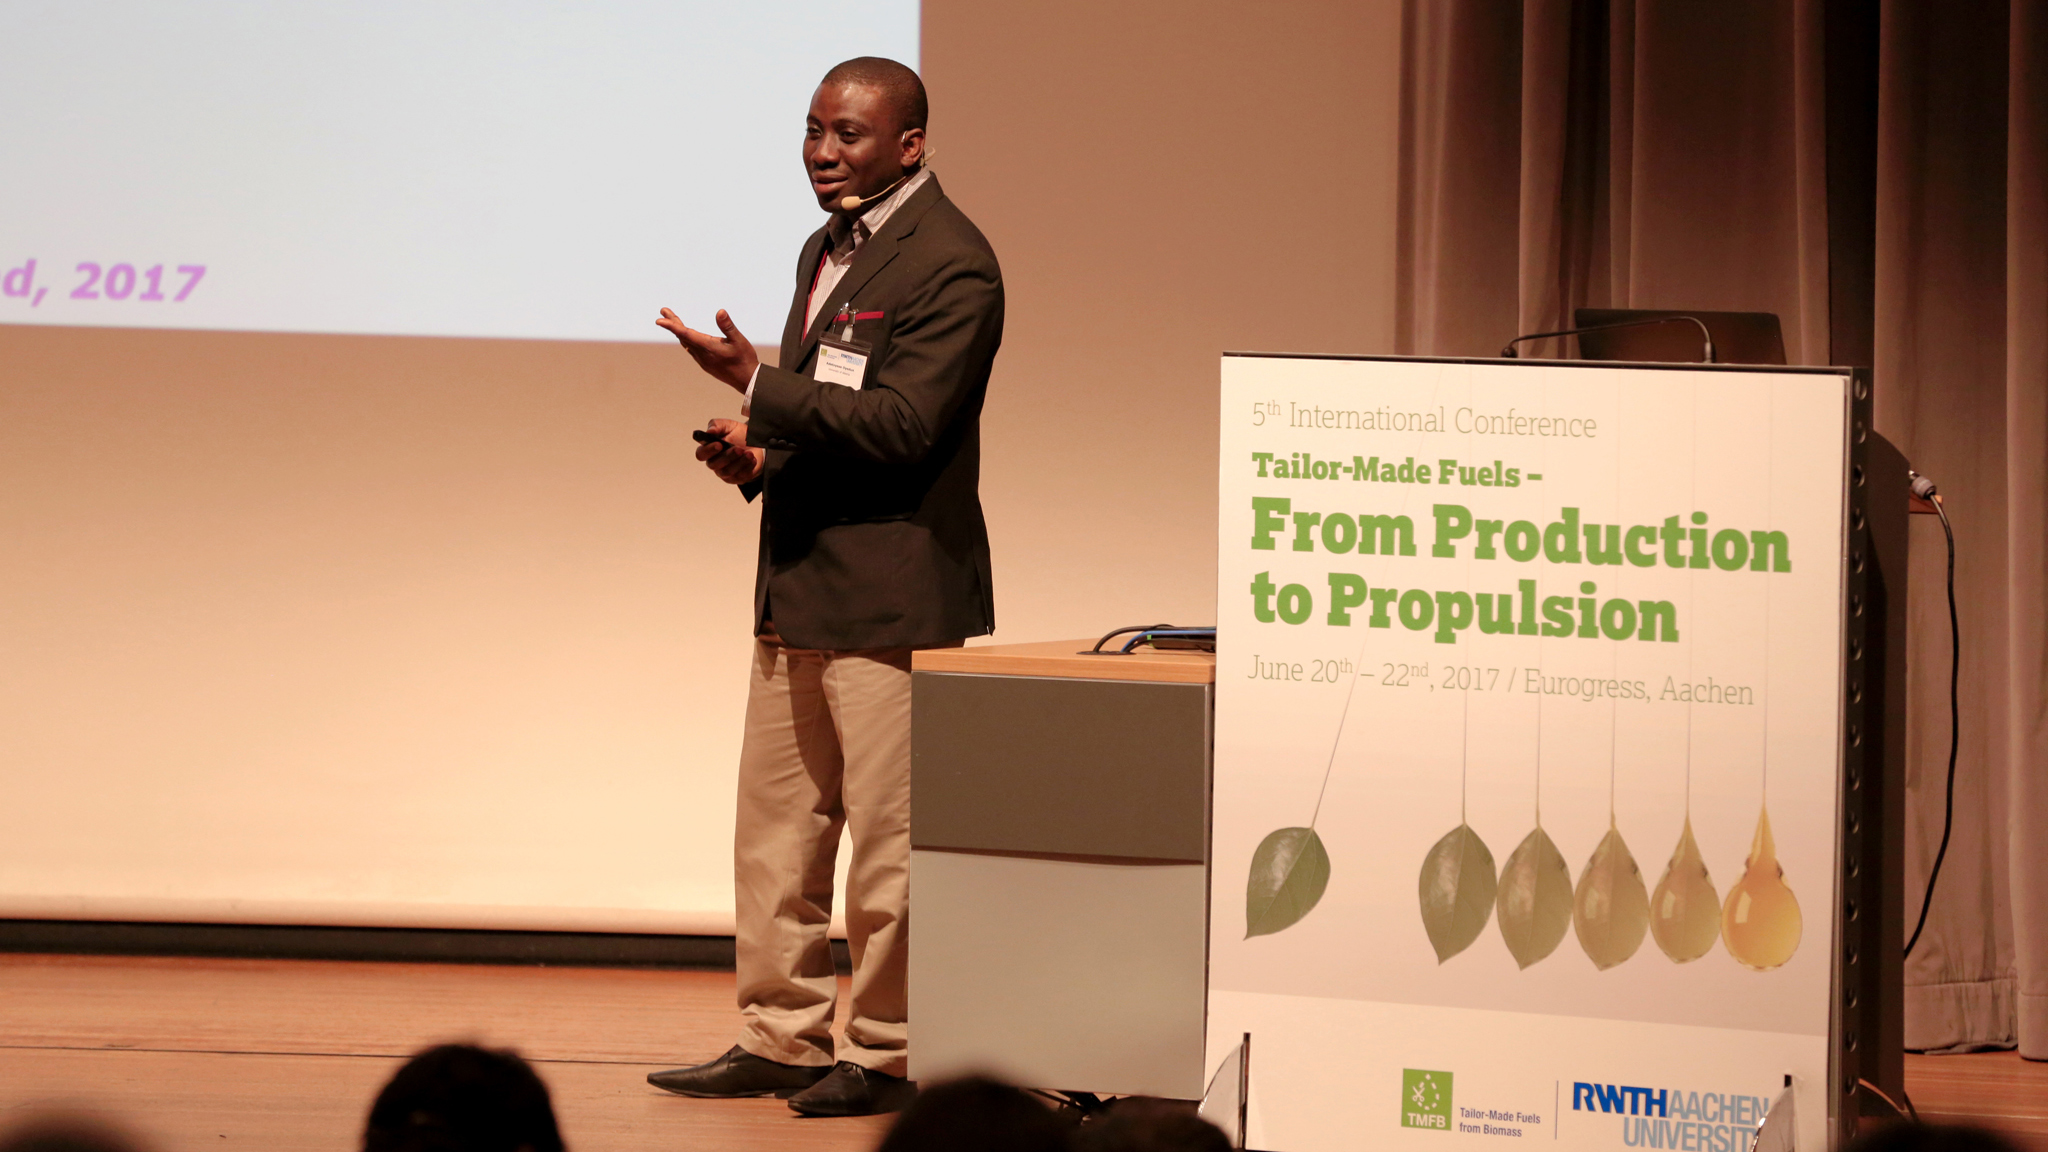 Ade shares his research outcome with the experts in the field at the 5th International Conference on Tailor-Made Fuels from Biomass in Germany in 2017.